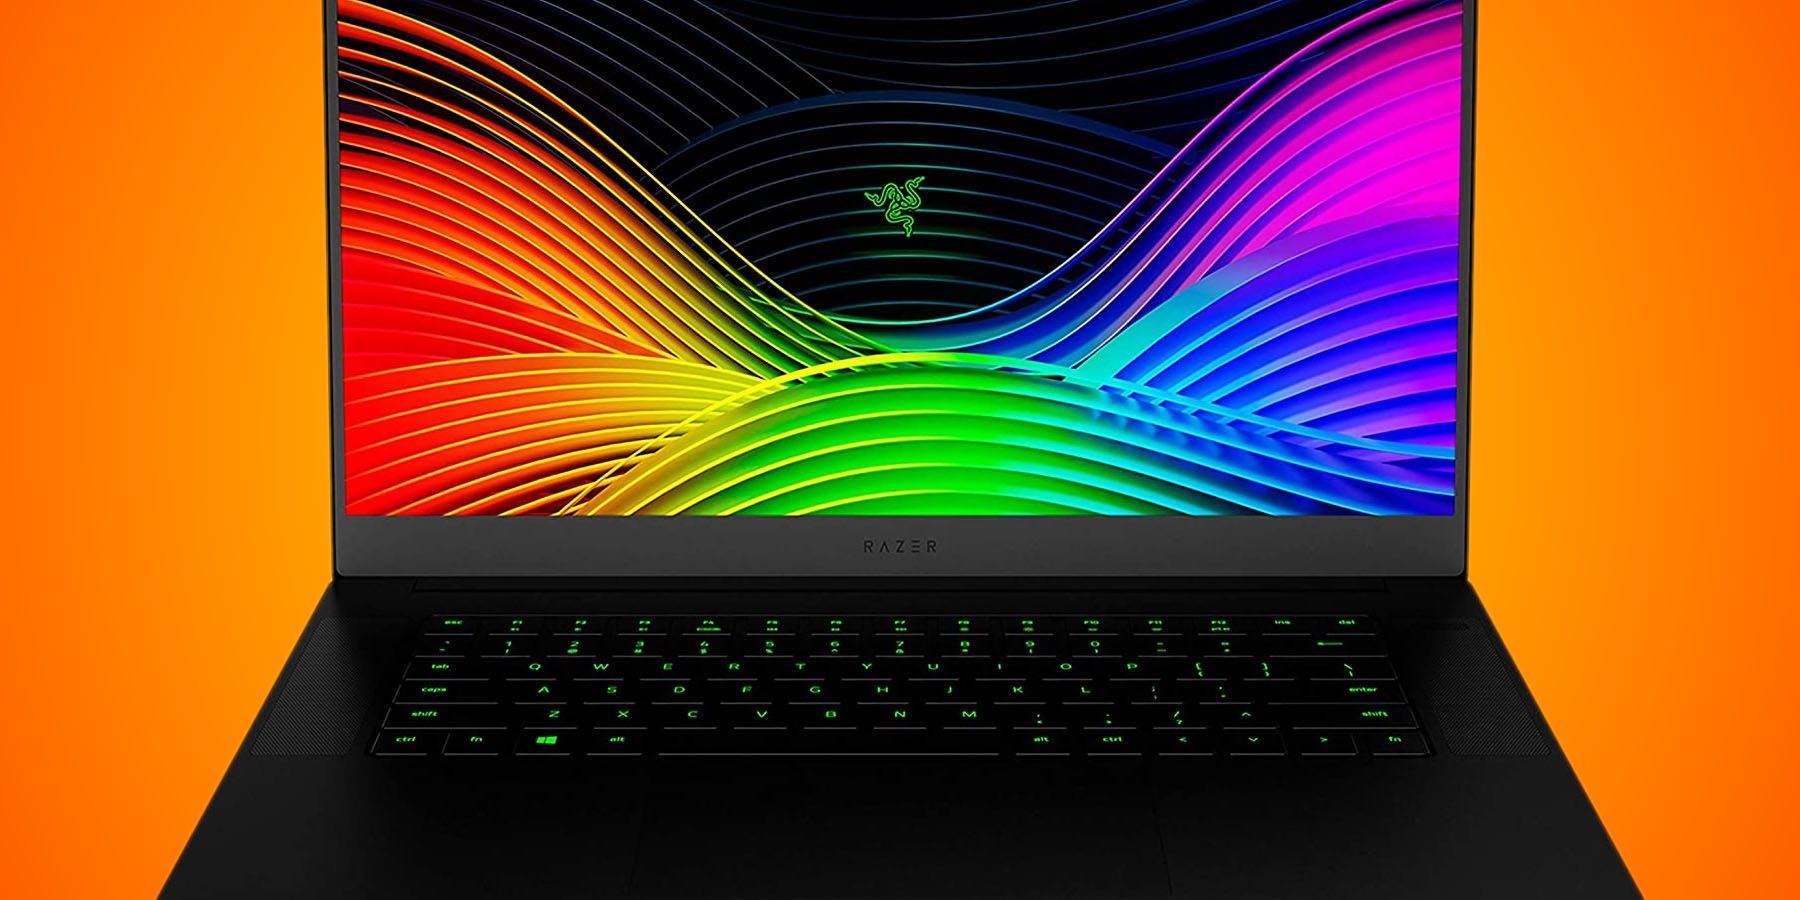 The best deals on gaming laptops